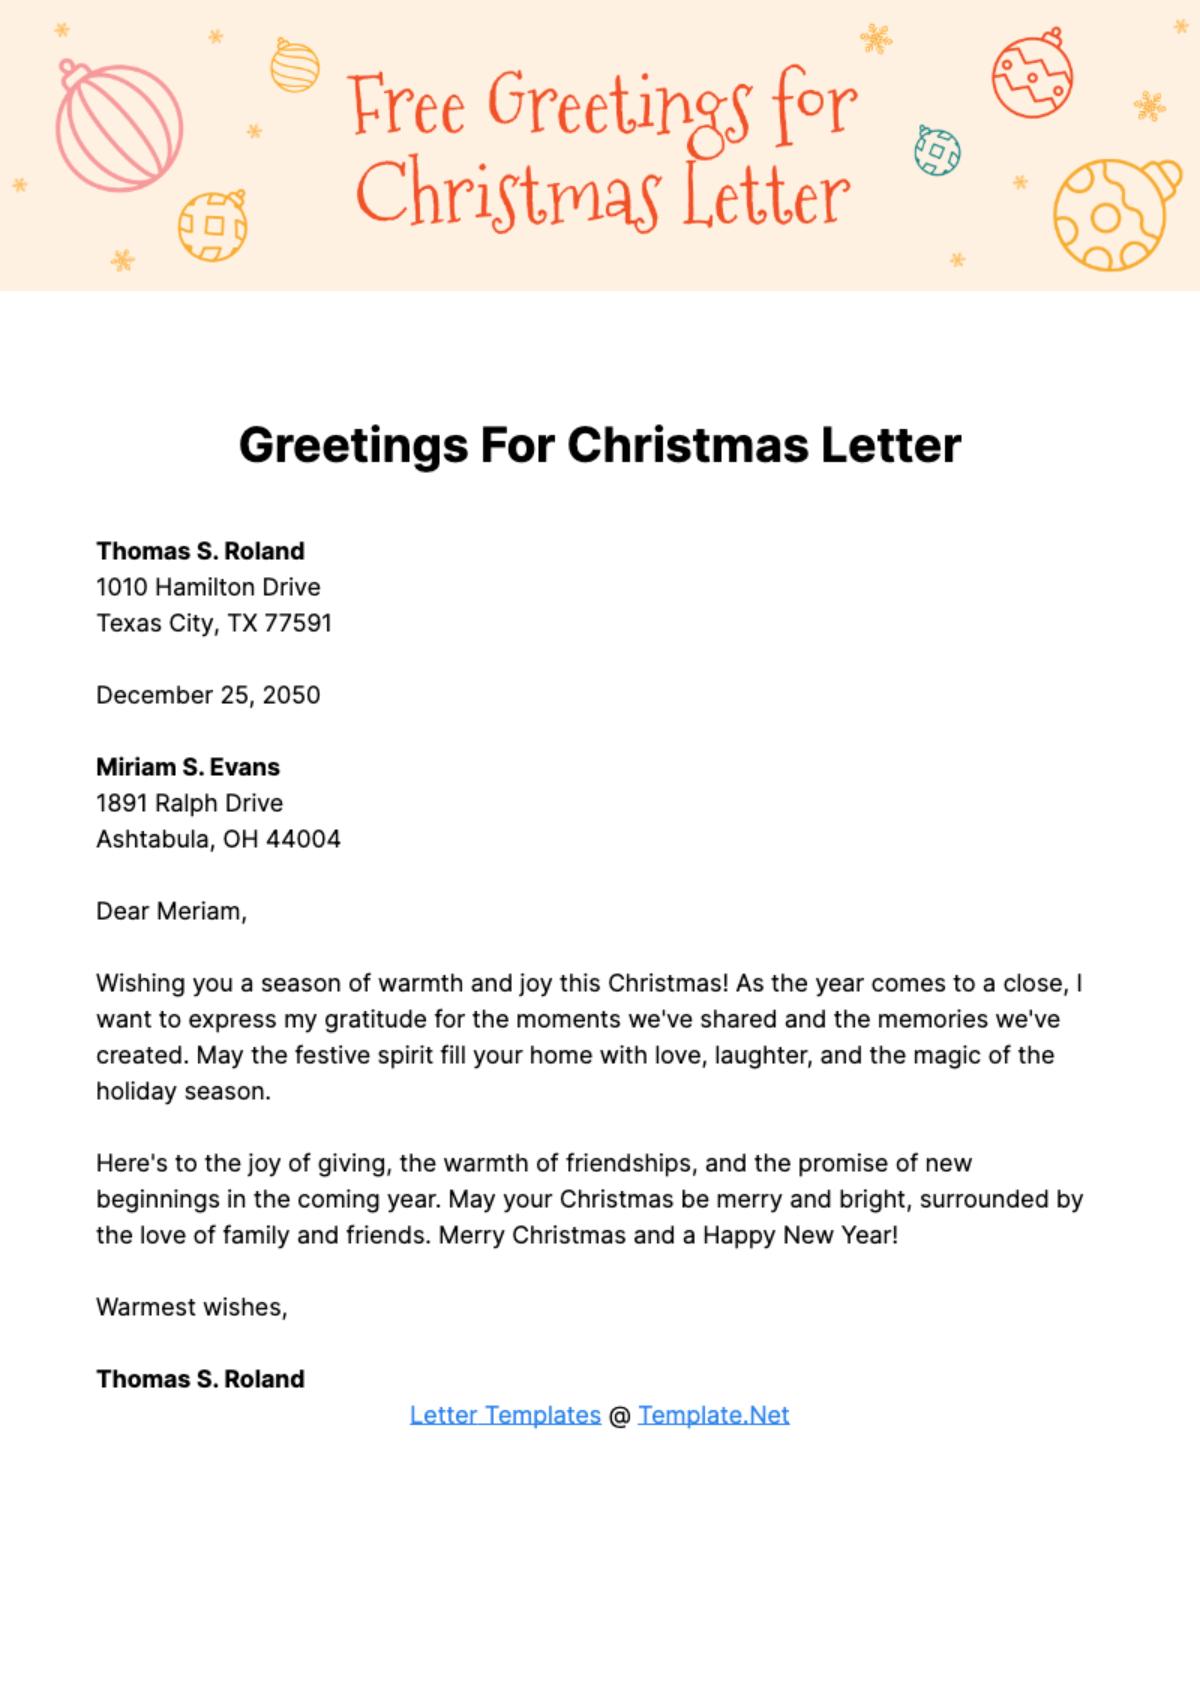 Free Greetings for Christmas Letter Template